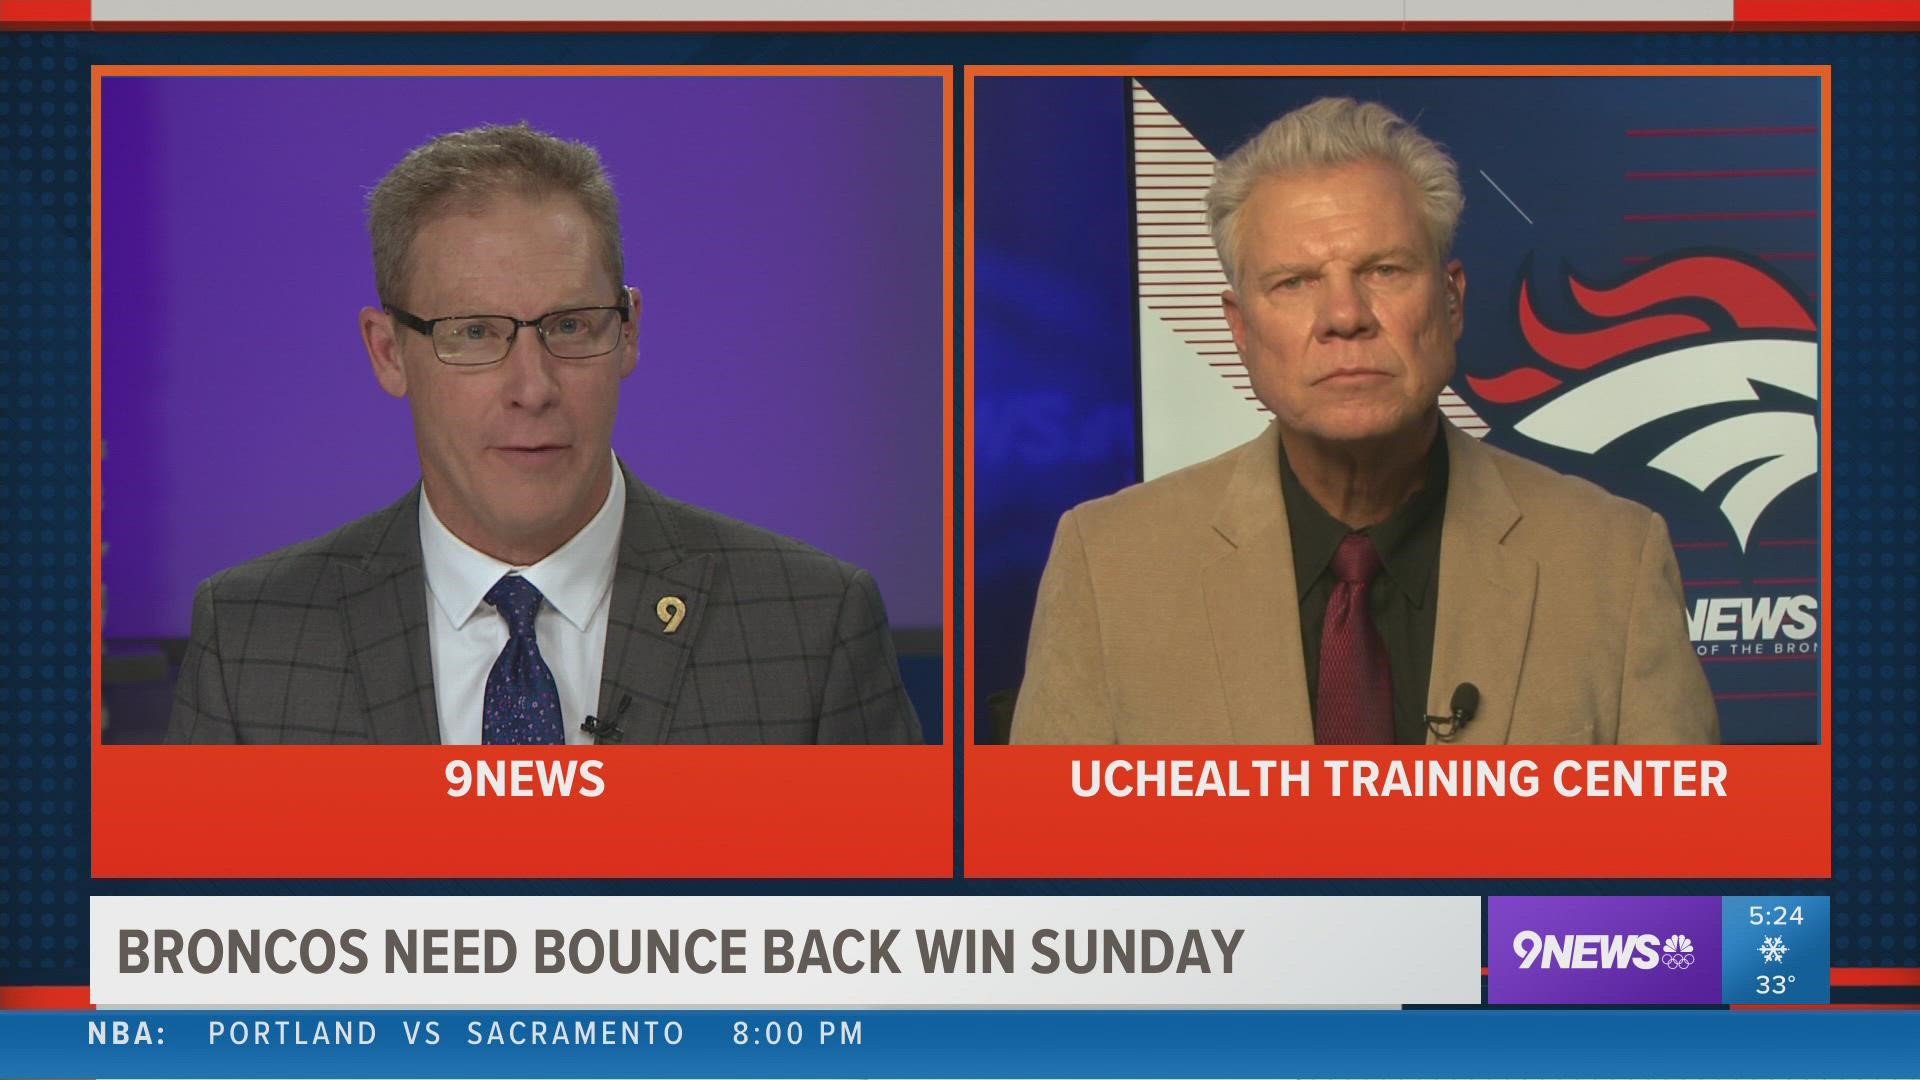 Broncos insider Mike Klis joined Rod Mackey with the latest on the team as a showdown with the Chargers looms.